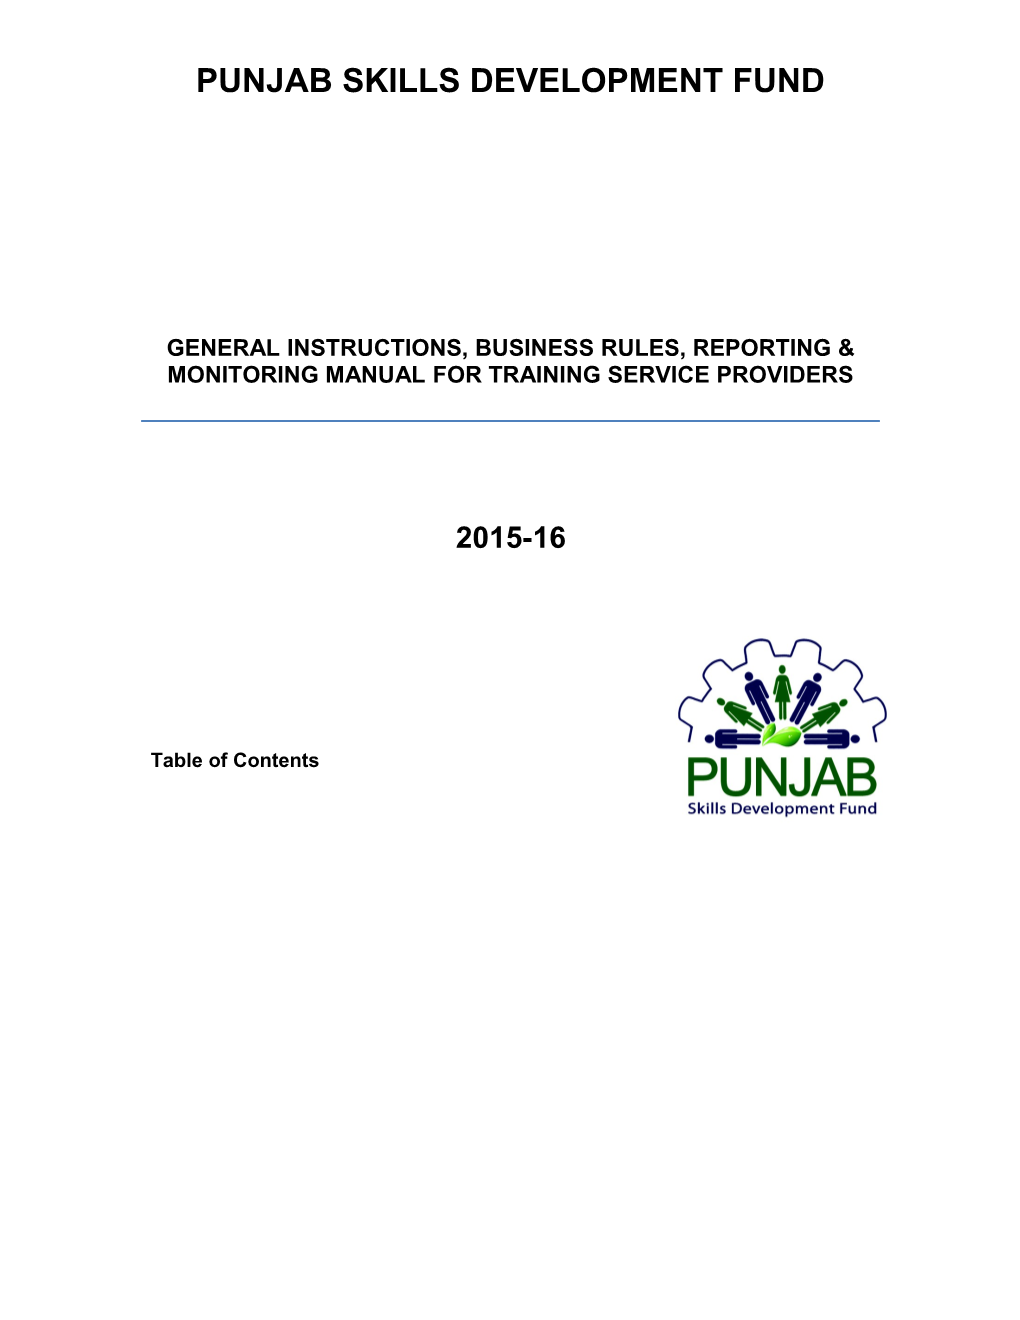 Business Rules, Reporting & Monitoring Manual for Training Service Providers